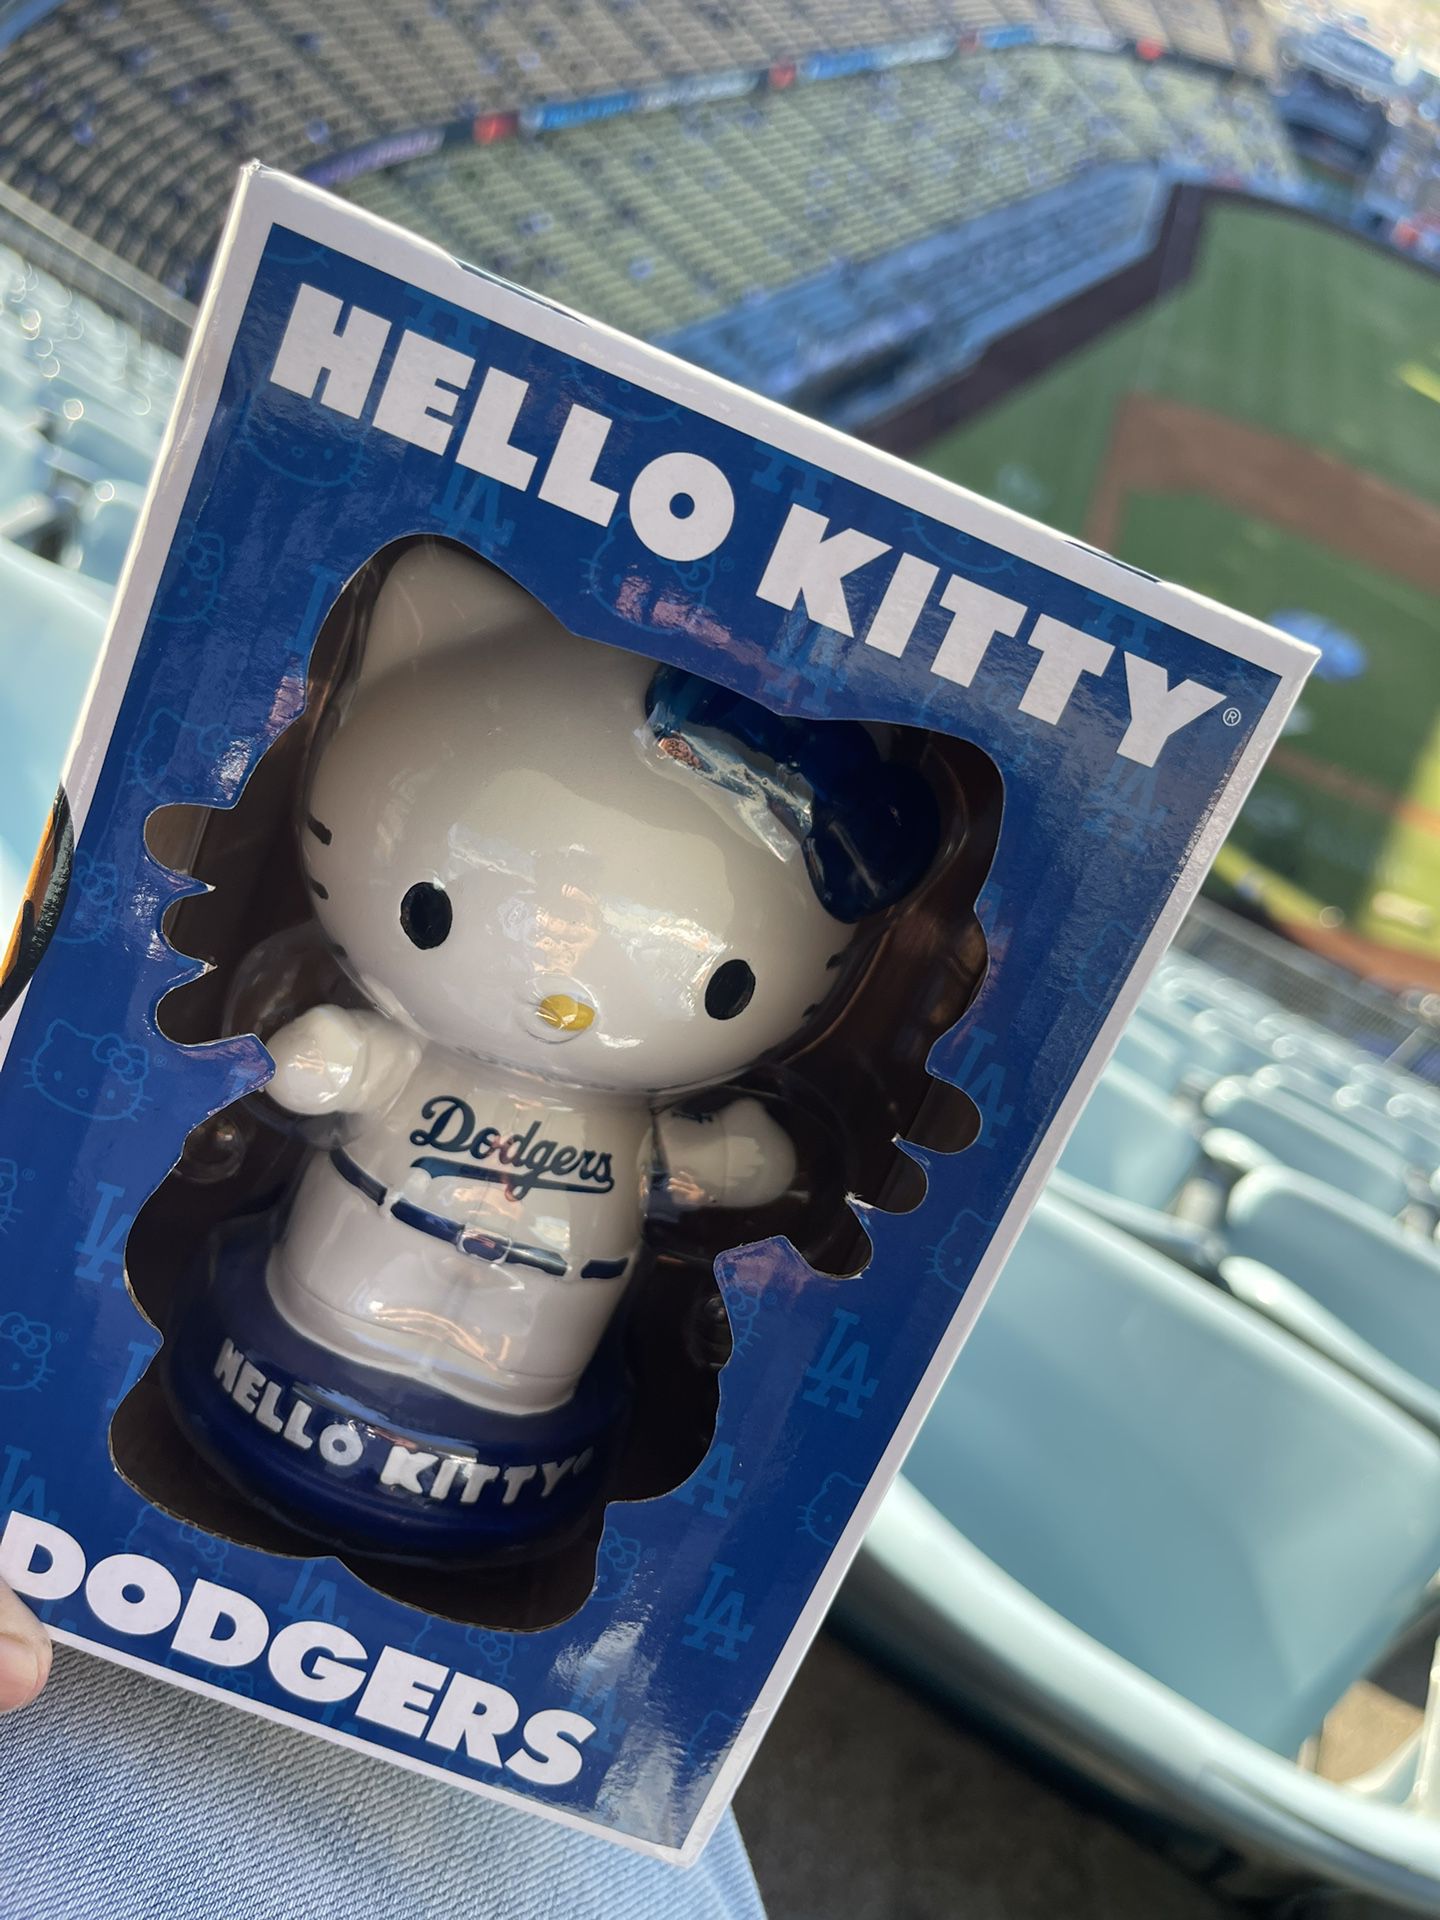 Dodgers Bobble Head Hello Kitty for Sale in Los Angeles, CA - OfferUp